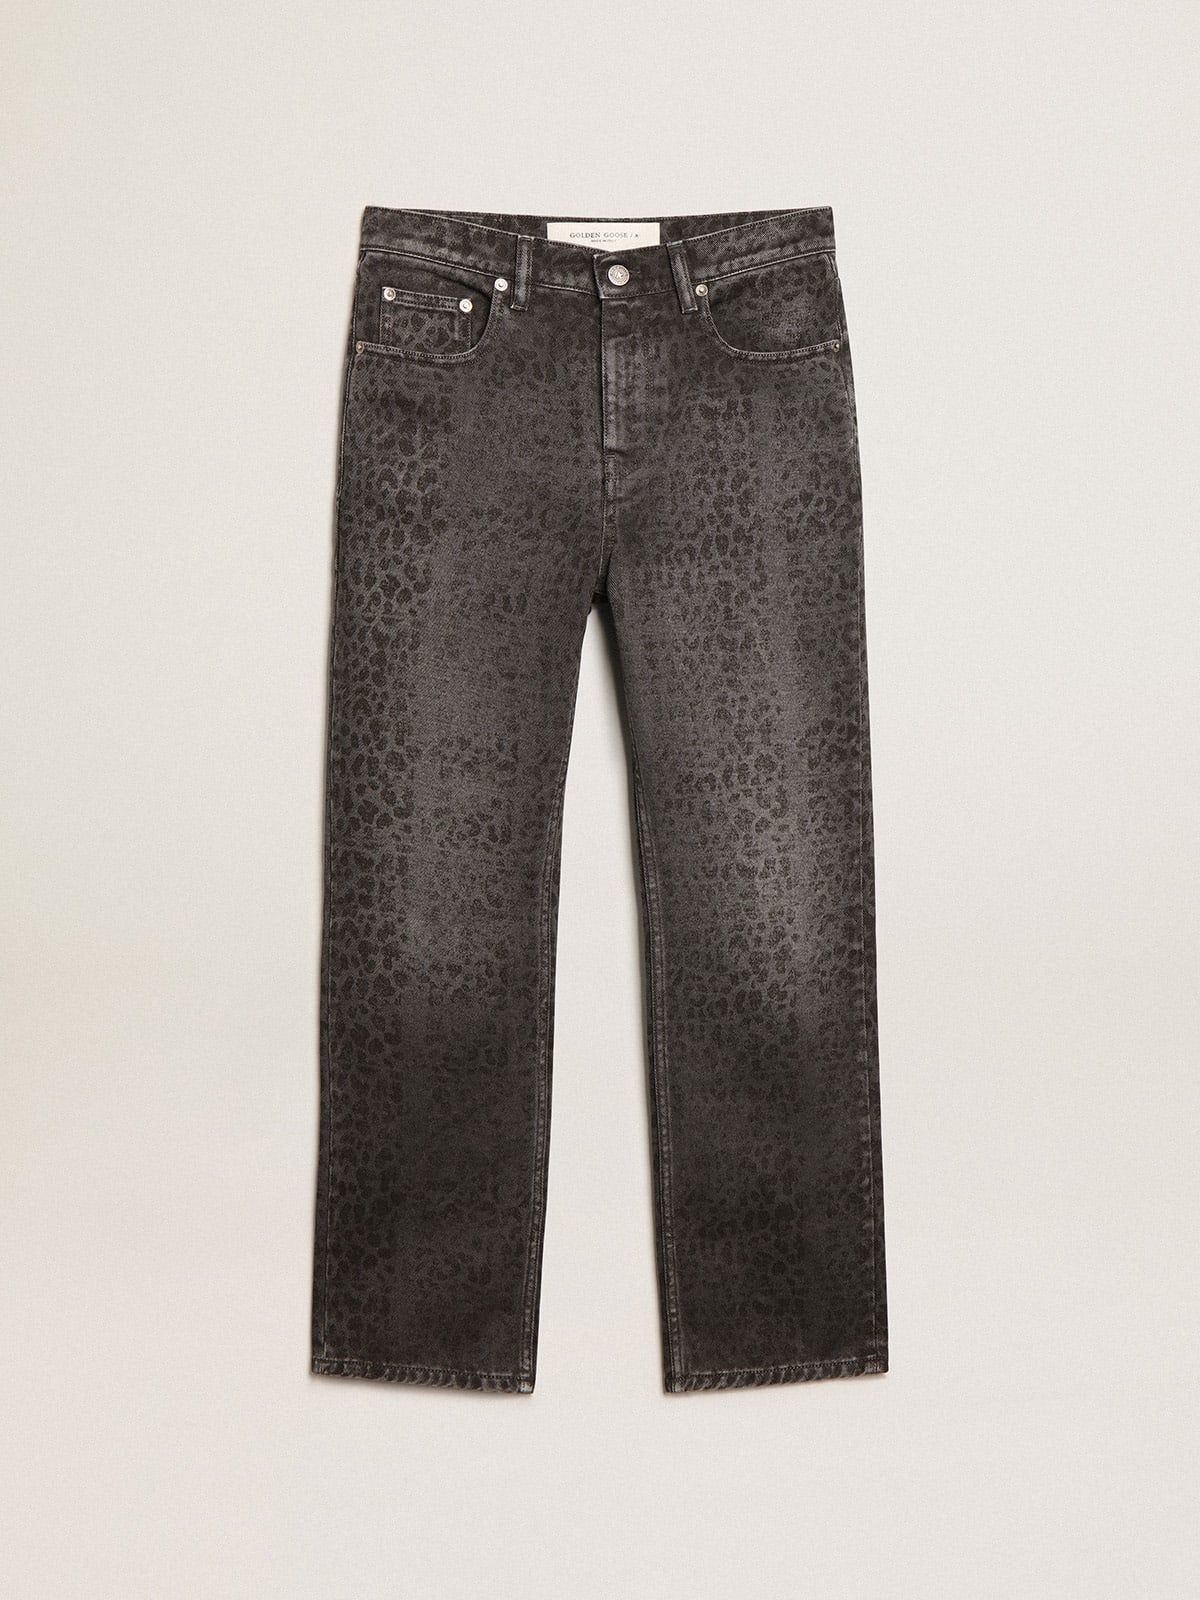 Women's gray jeans with leopard print